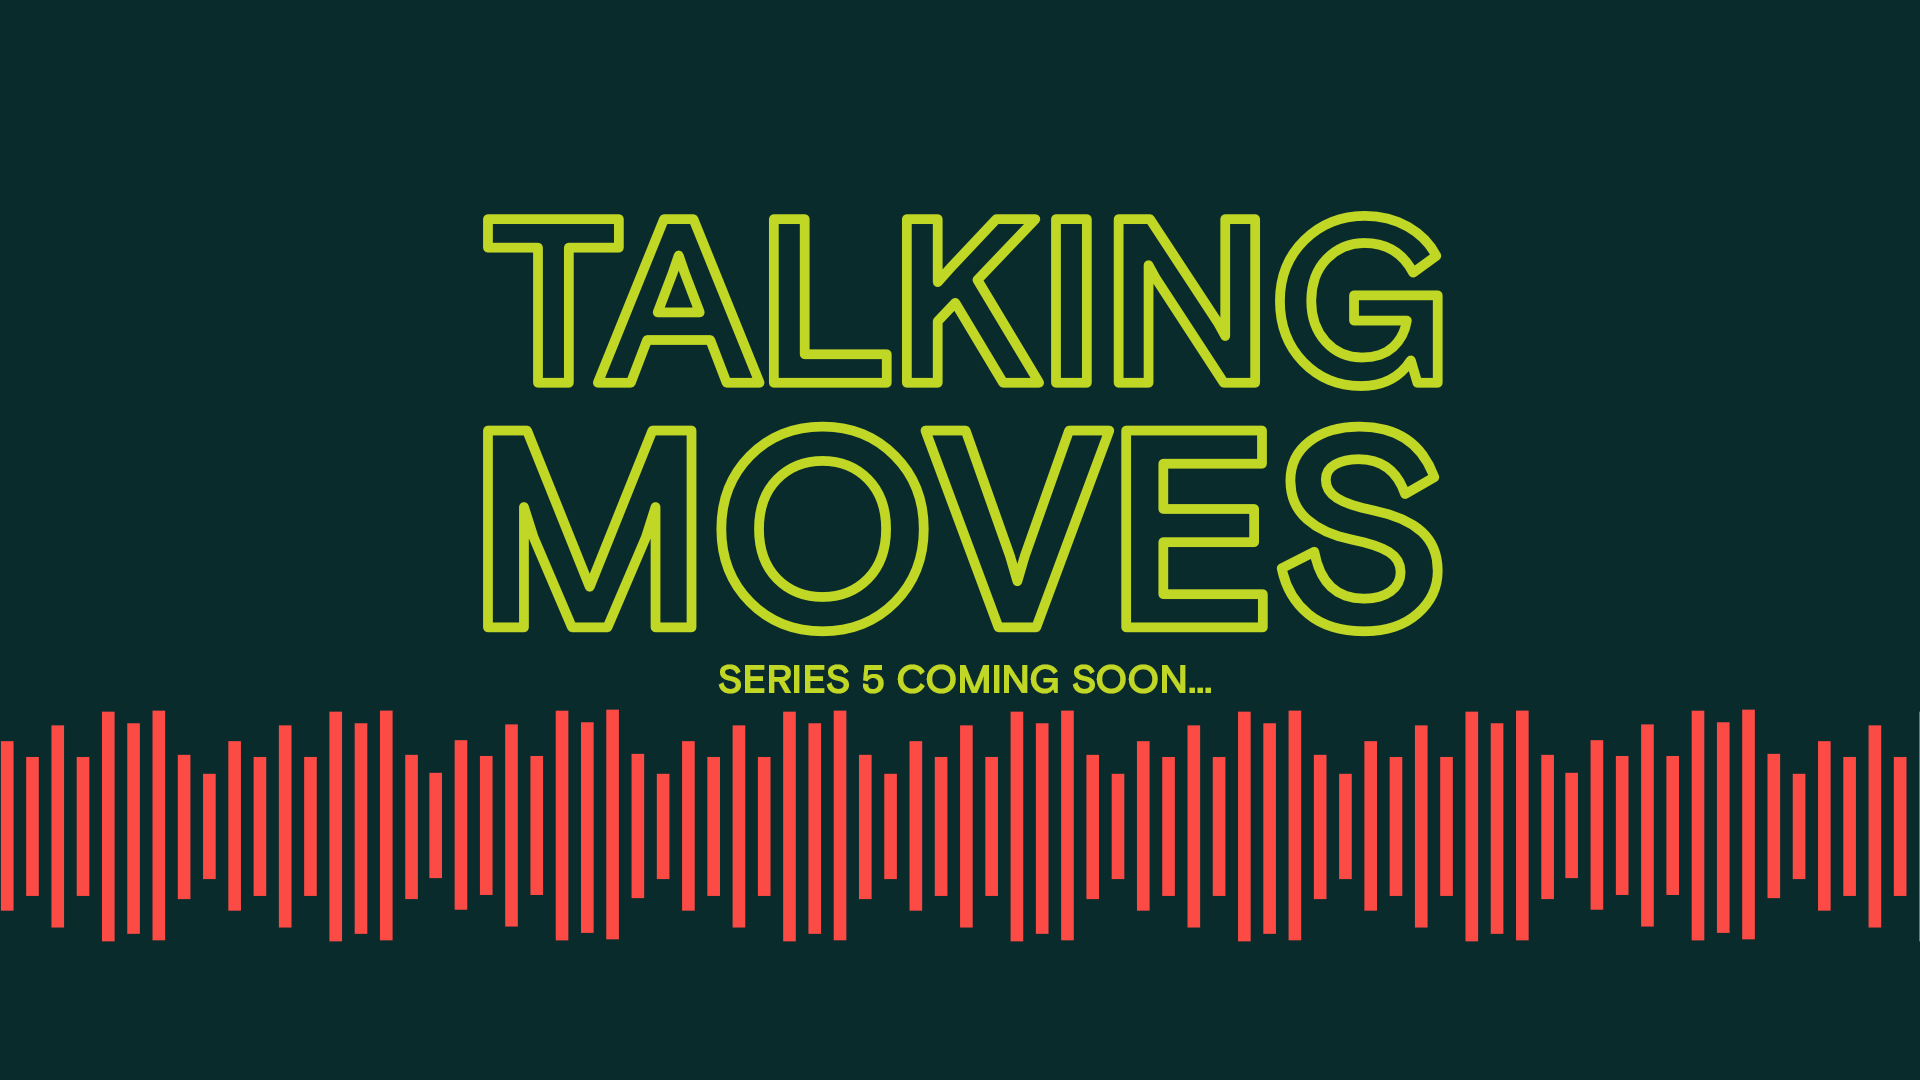 Talking Moves Series 5 coming soon. Talking Moves logo with pink bars to look like a sound wave